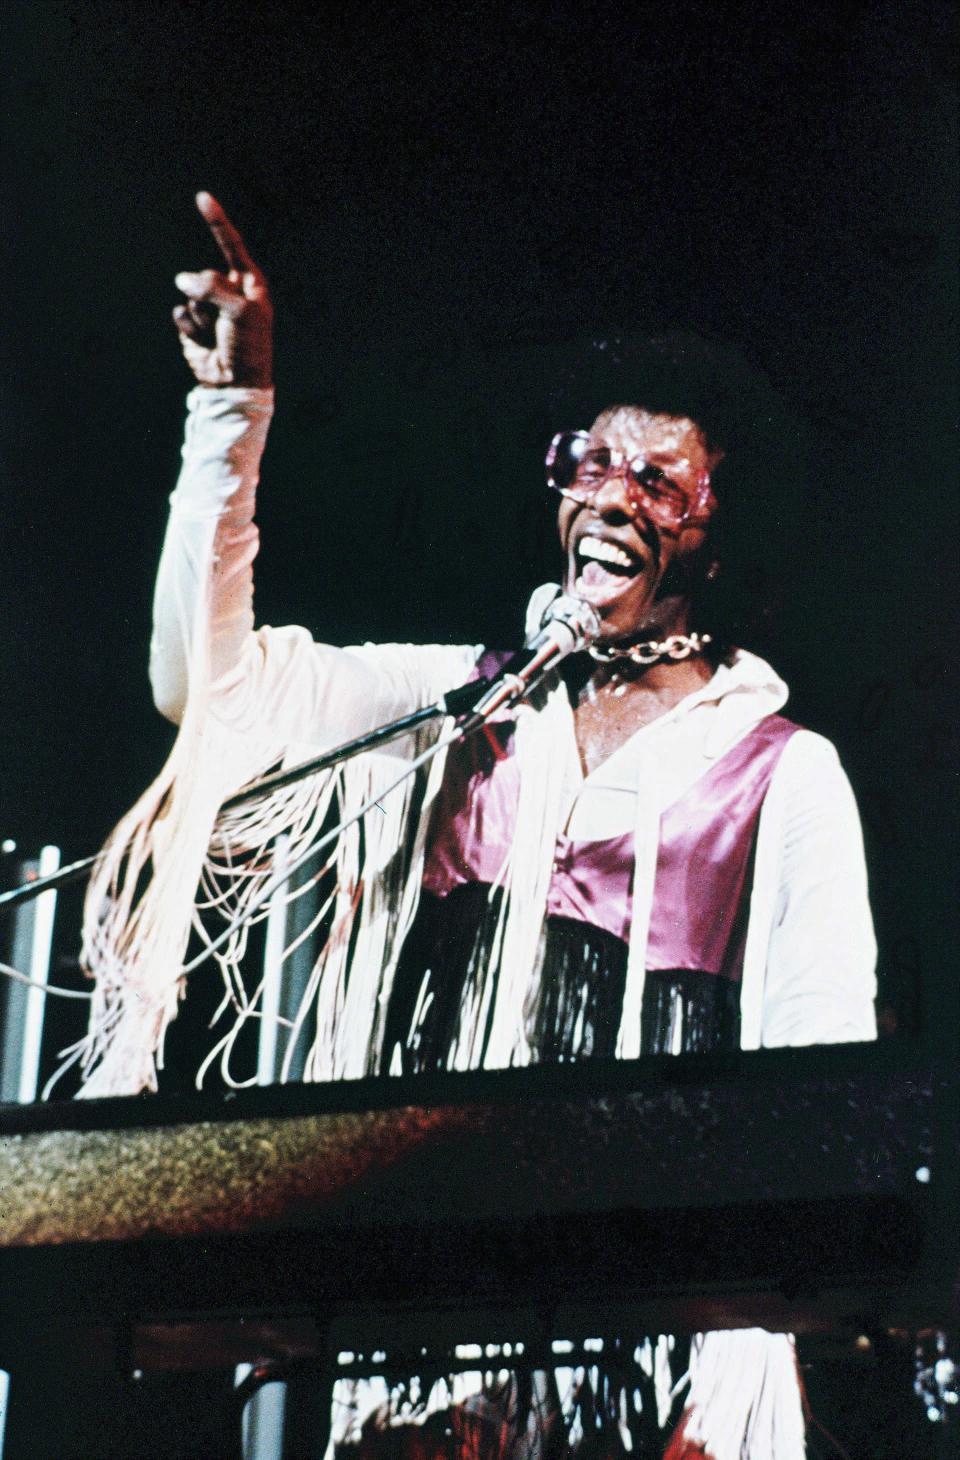 Sly Stone of Sly and the Family Stone